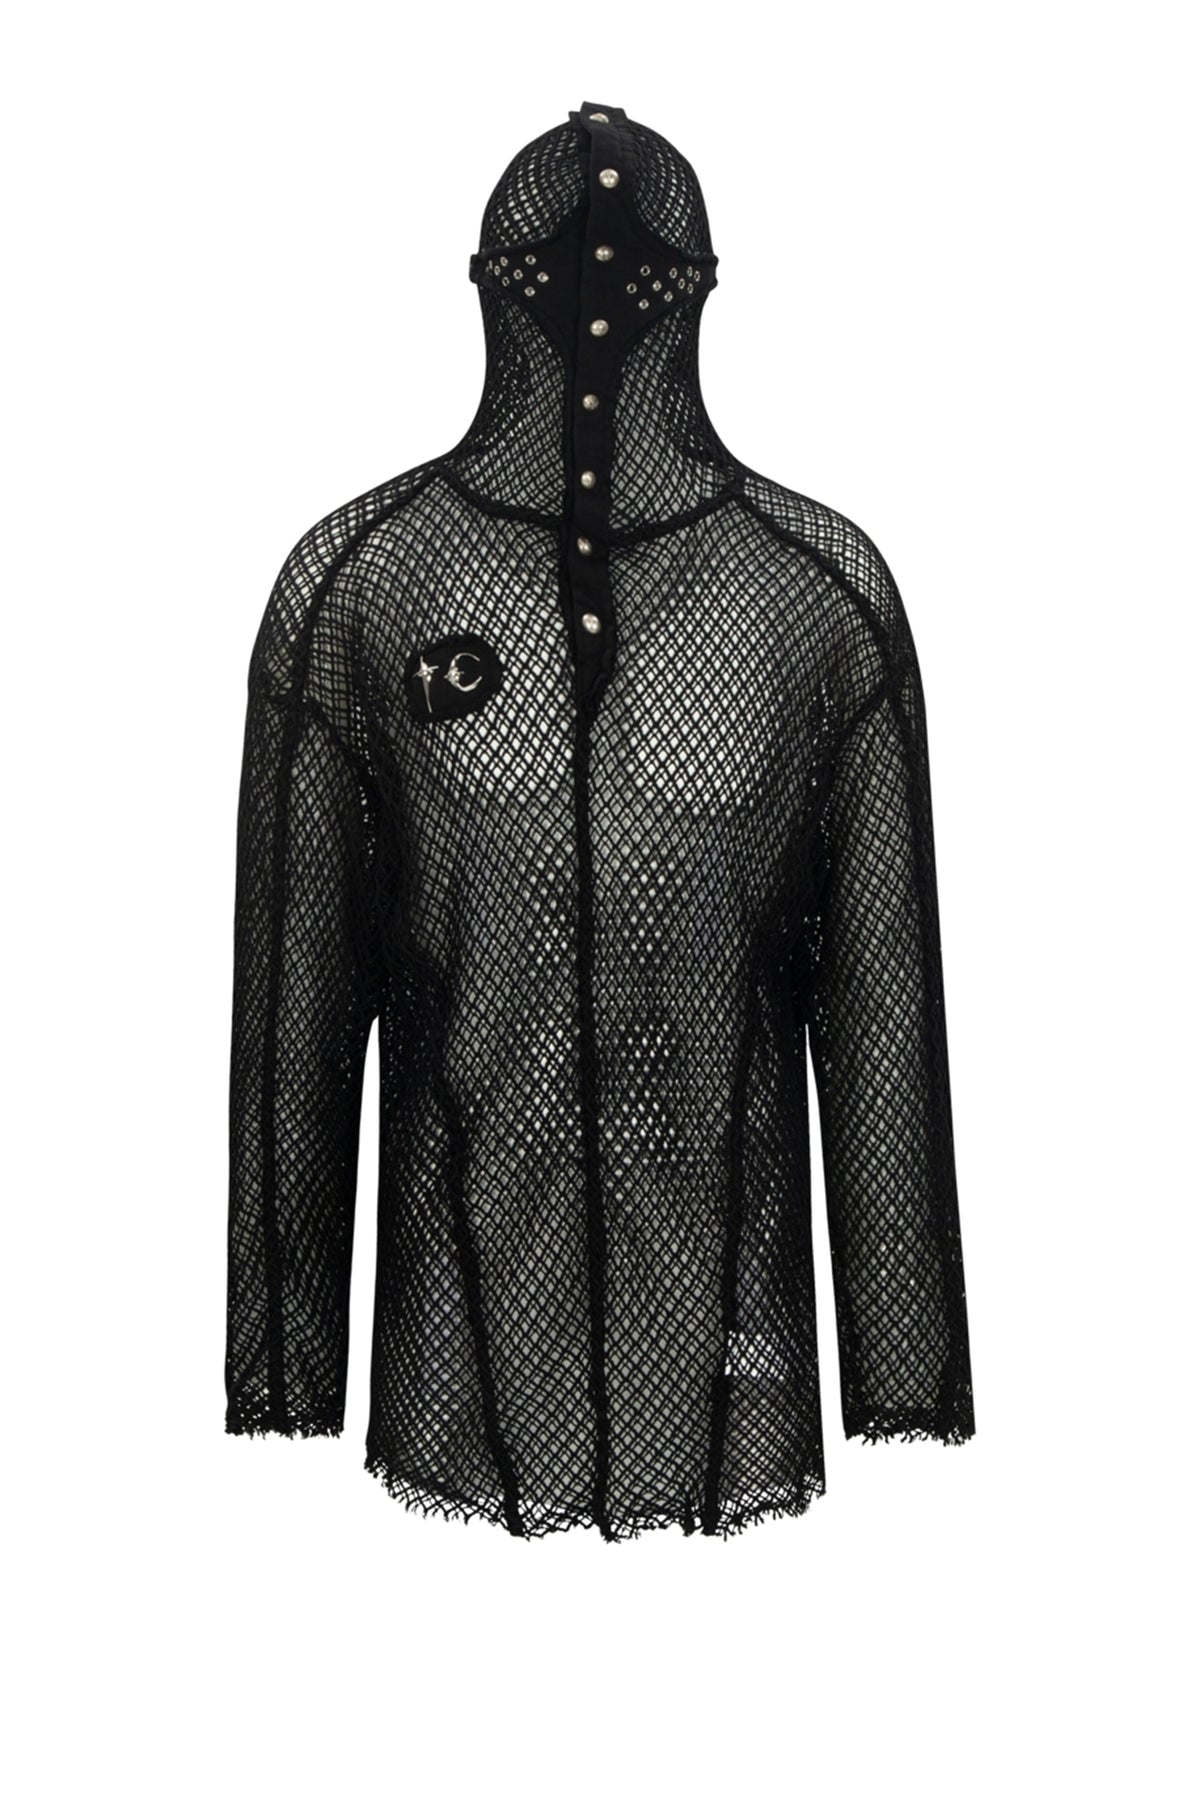 MITHRIL ARMOUR HOODED SLEEVE / BLK